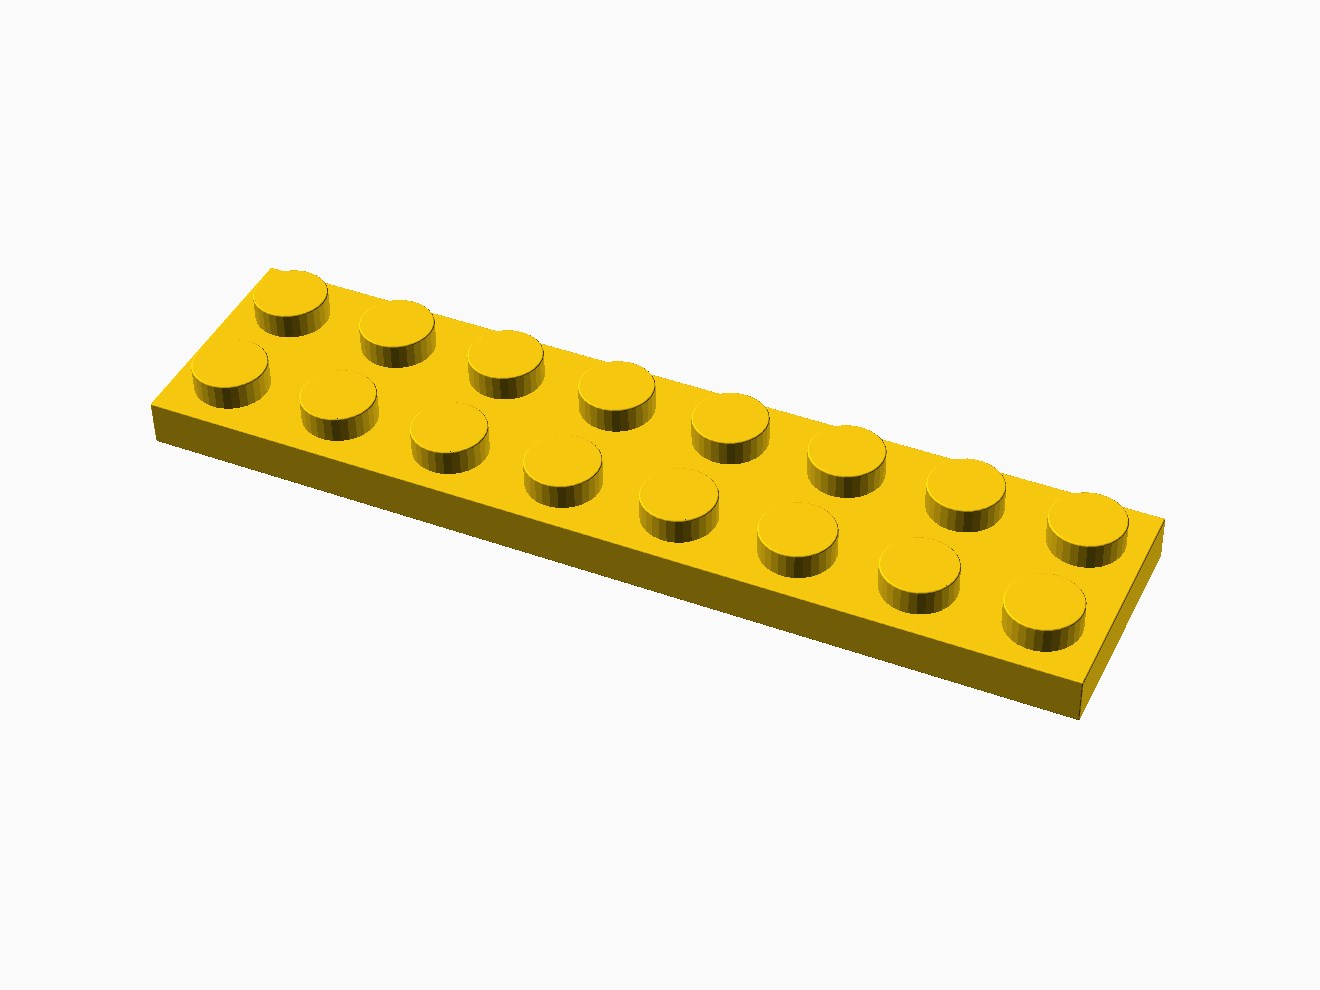 3D printable model of a LEGO 8x2 Plate with standard knobs.